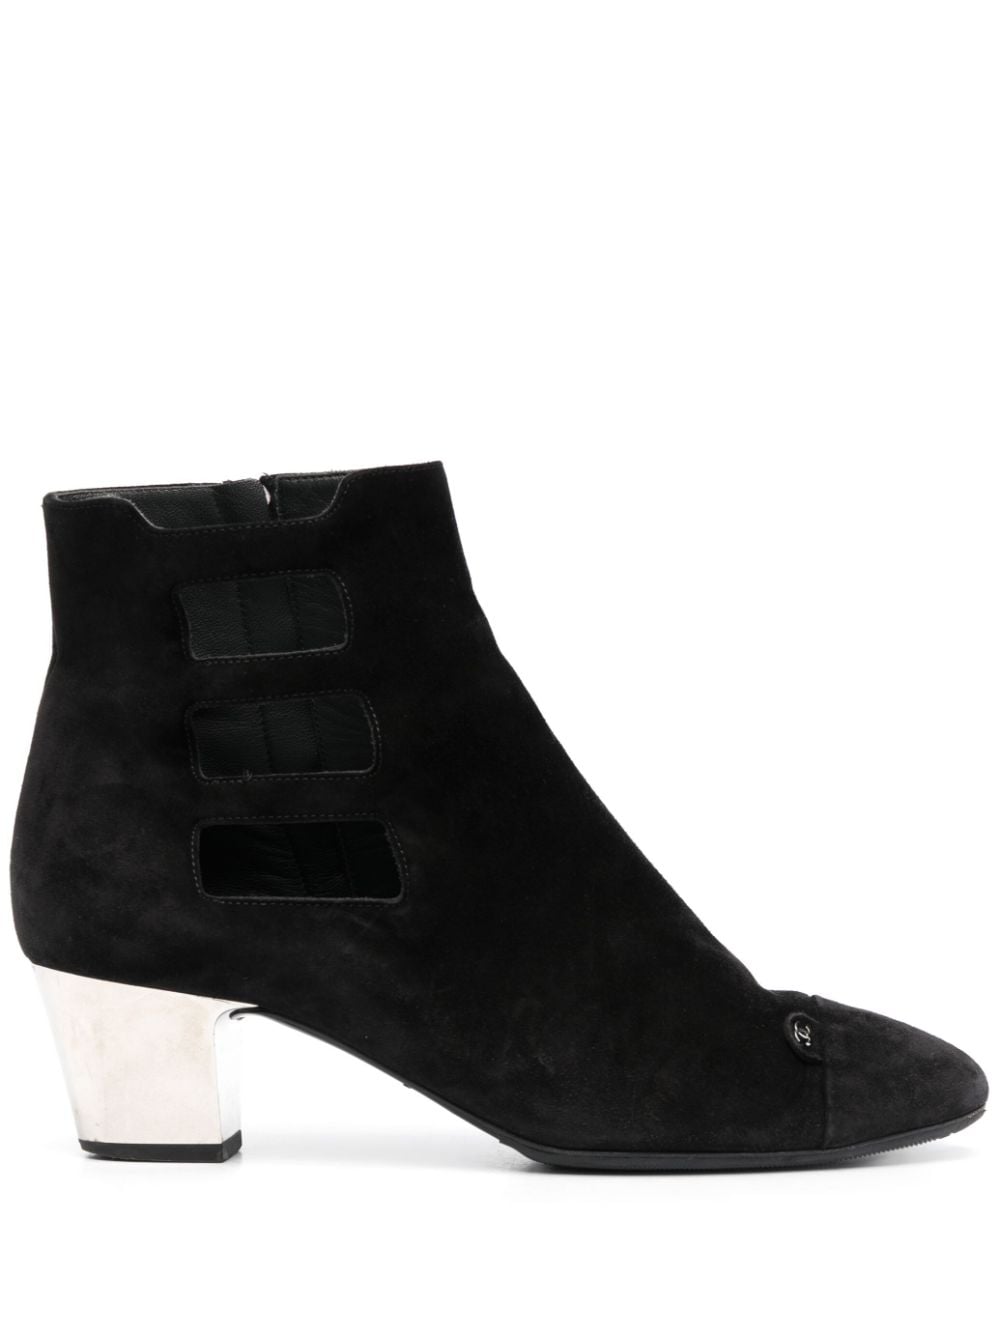 CHANEL Pre-Owned 2010 CC suede ankle boots - Black